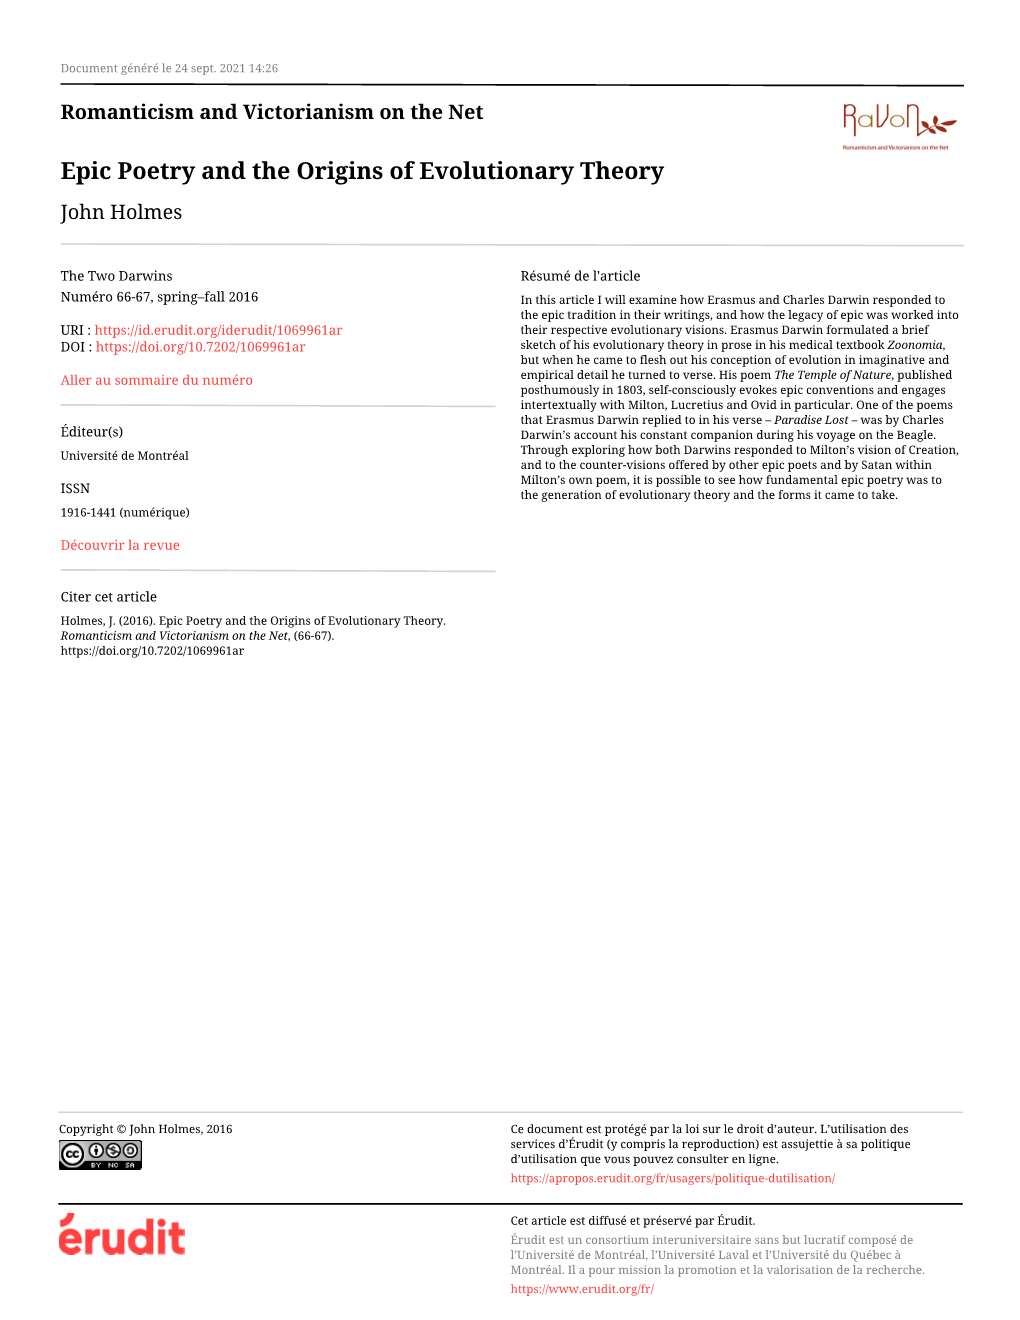 Epic Poetry and the Origins of Evolutionary Theory John Holmes